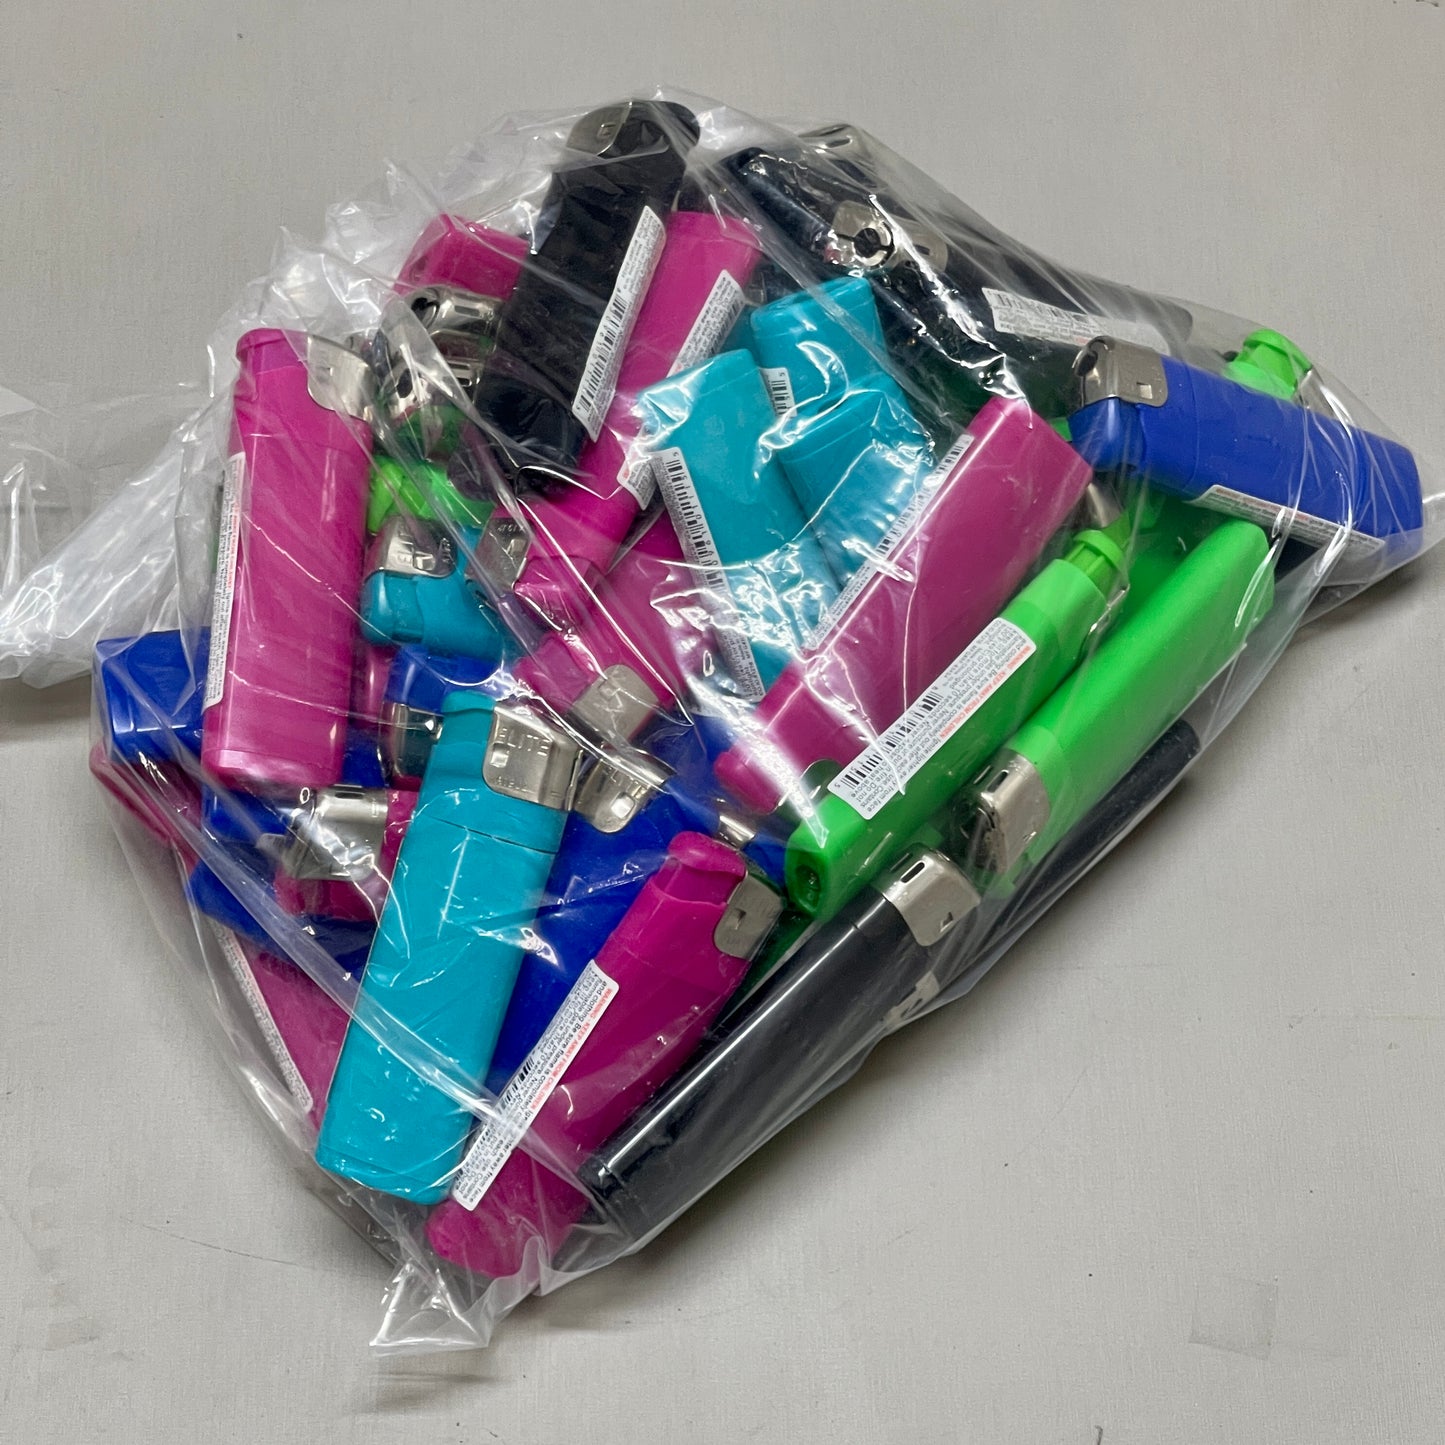 ZA@ ELITE BRANDS 50-Pack Elite Electronic Lighter Refillable Multi-Color (AS-IS, Bagged)